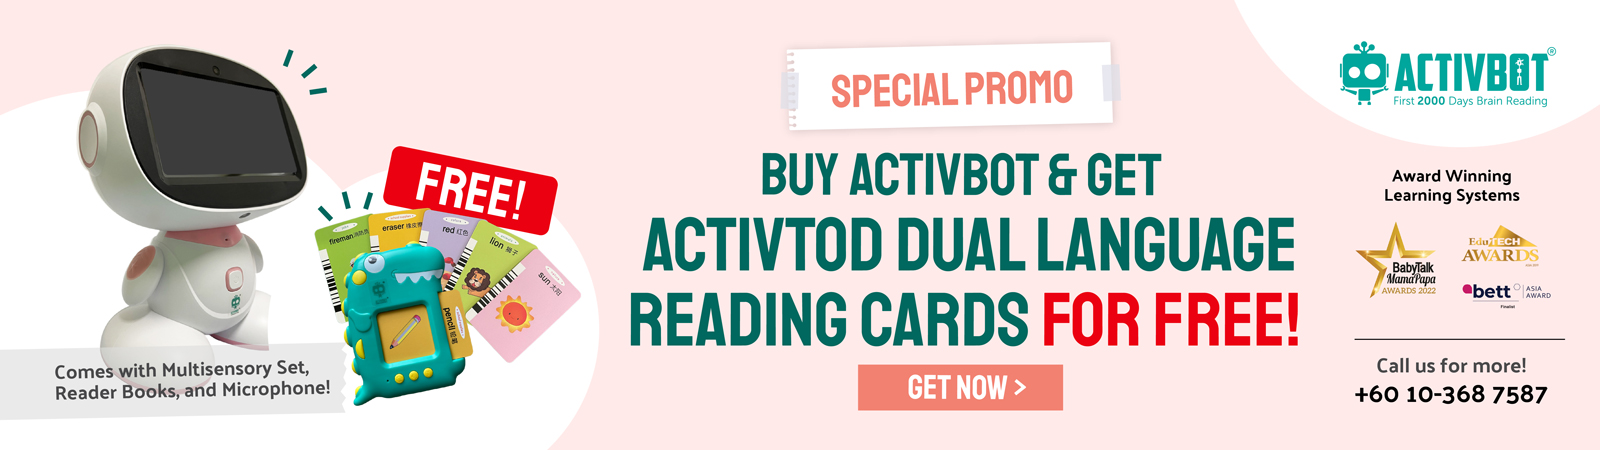 Activbot Learning Systems